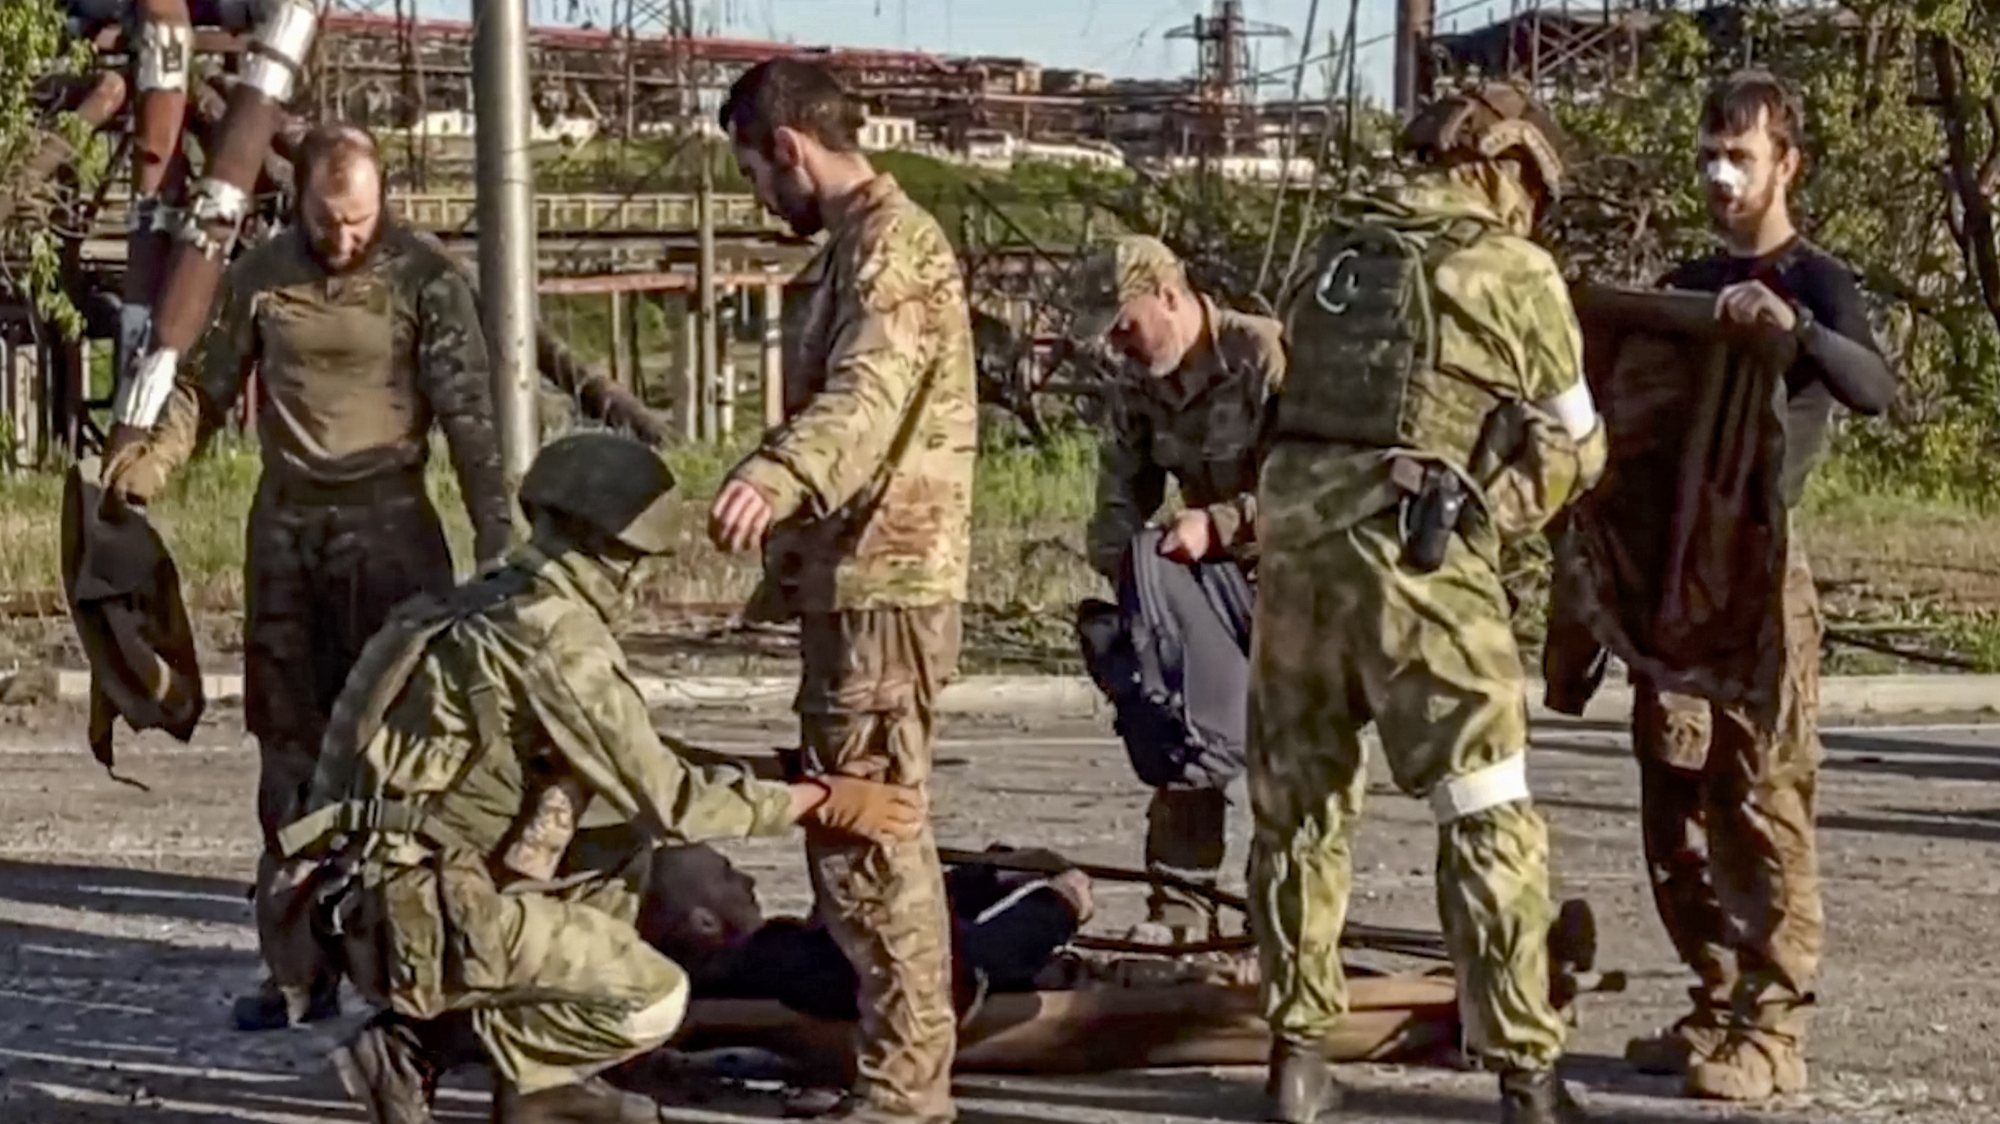 epa09952366 A handout still image taken from a handout video made available by the Russian Defence Ministry&#039;s press service shows Russian soldiers frisking Ukrainian servicemen as they are being evacuated from the besieged Azovstal steel plant in Mariupol, Ukraine, 17 May 2022. A total of 265 Ukrainian militants, including 51 seriously wounded, have laid down arms and surrendered to Russian forces, the Russian Ministry of Defence said on 17 May 2022. Those in need of medical assistance were sent for treatment to a hospital in Novoazovsk, the ministry states further. Russian President Putin on 21 April 2022 ordered his Defence Minister to not storm but to blockade the plant where a number of Ukrainian fighters were holding out. On 24 February, Russian troops invaded Ukrainian territory starting a conflict that has provoked destruction and a humanitarian crisis. According to the UNHCR, more than six million refugees have fled Ukraine, and a further 7.7 million people have been displaced internally within Ukraine since.  EPA/RUSSIAN DEFENCE MINISTRY PRESS SERVICE HANDOUT  BEST QUALITY AVAILABLE HANDOUT EDITORIAL USE ONLY/NO SALES